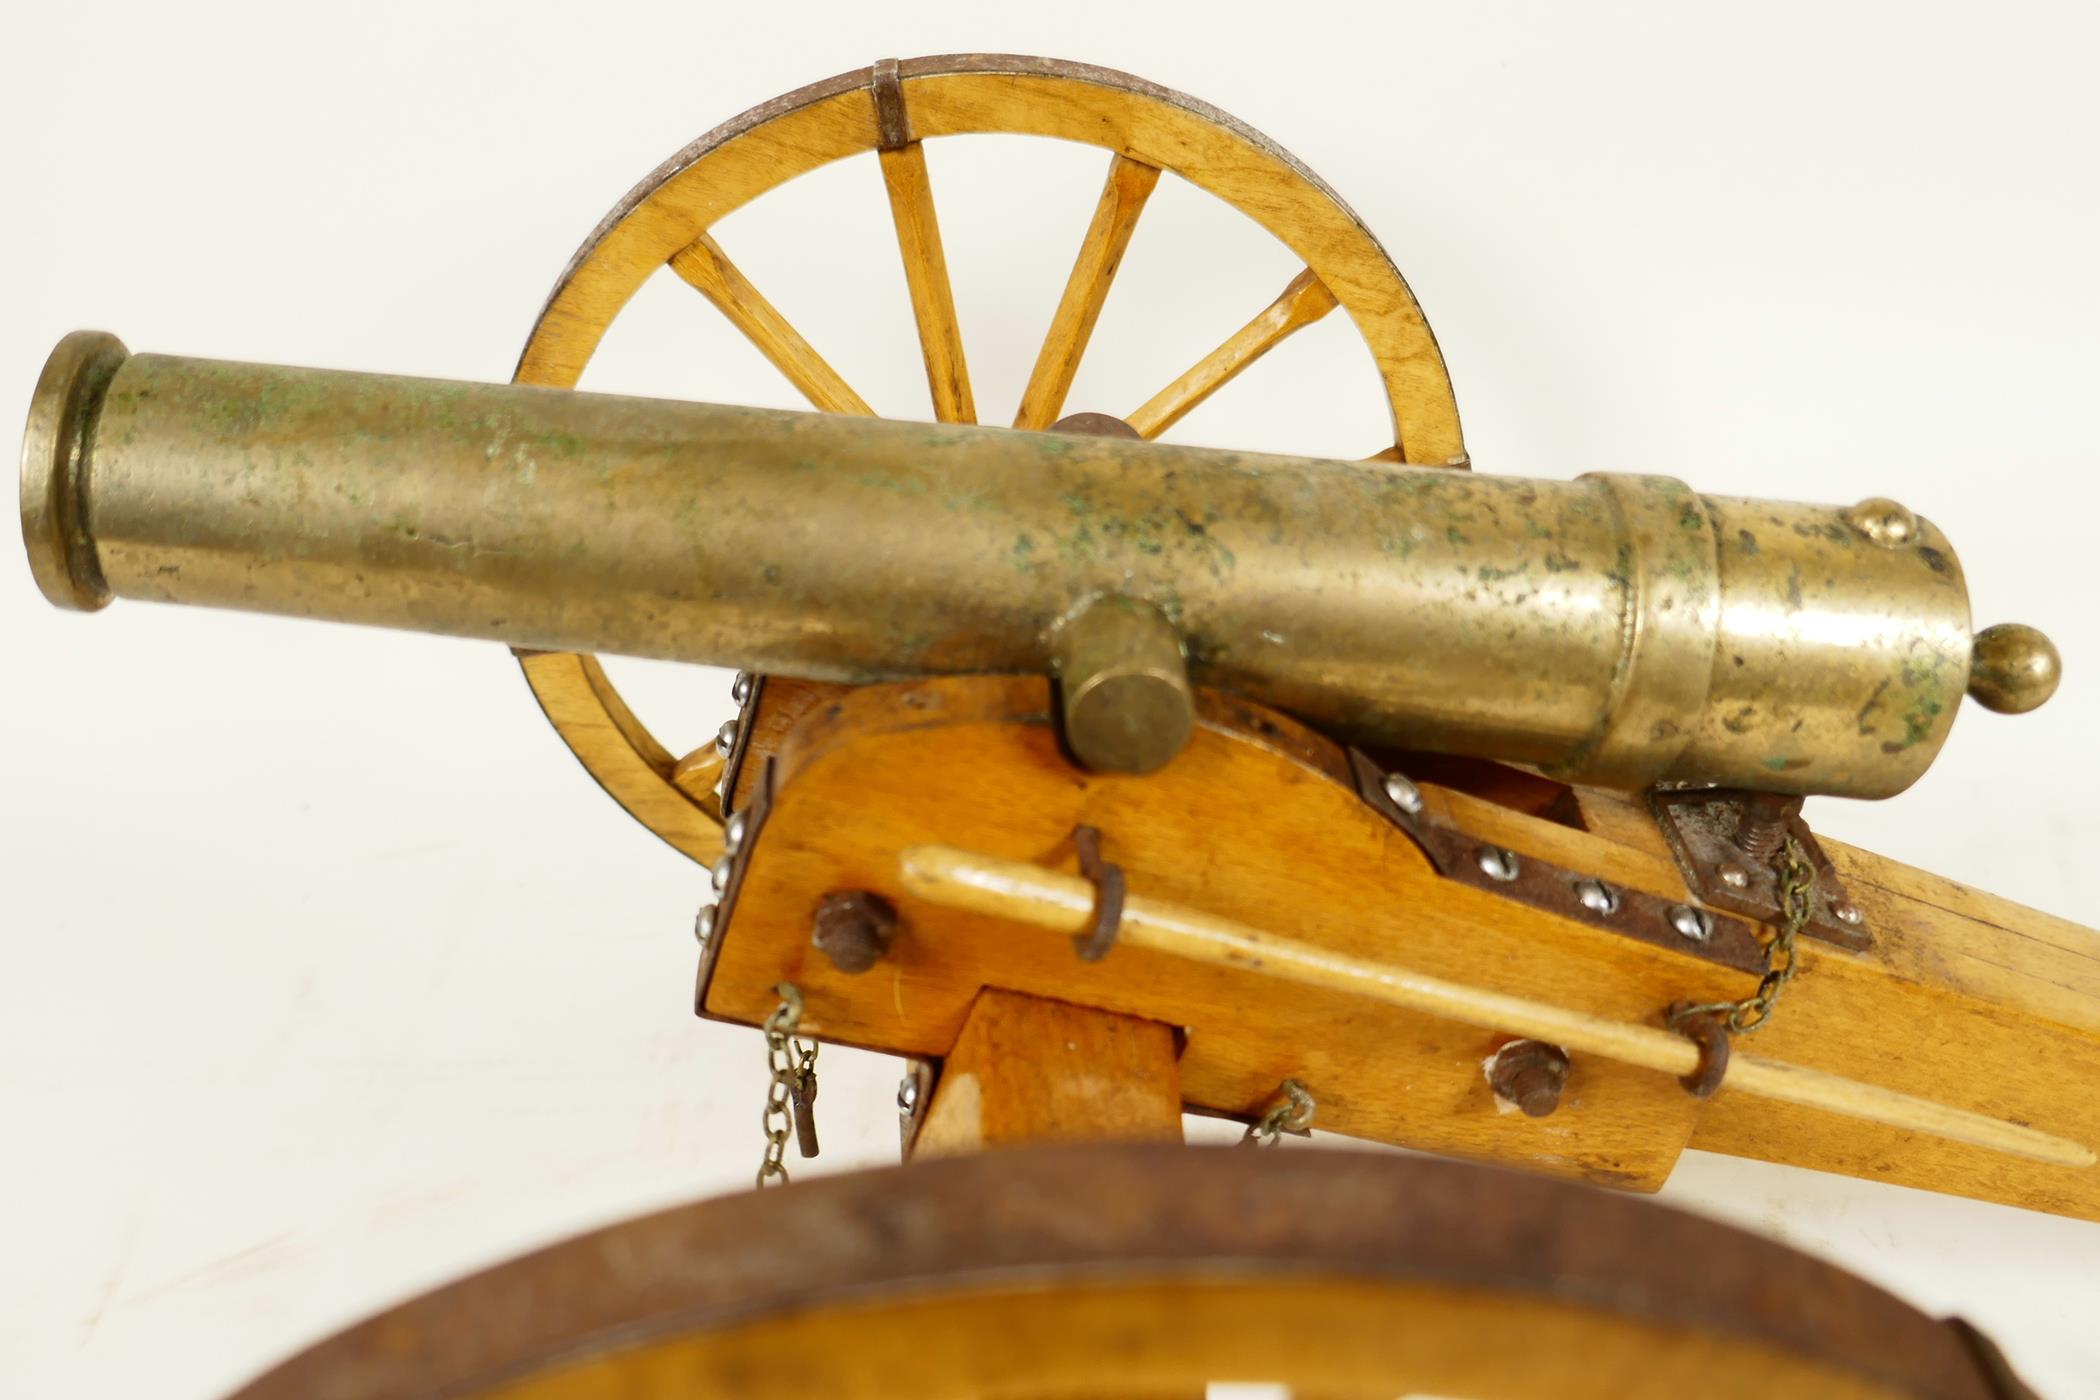 An antique ornamental table top bronze cannon, on a hand made wooden carriage with metal fittings, - Image 2 of 4